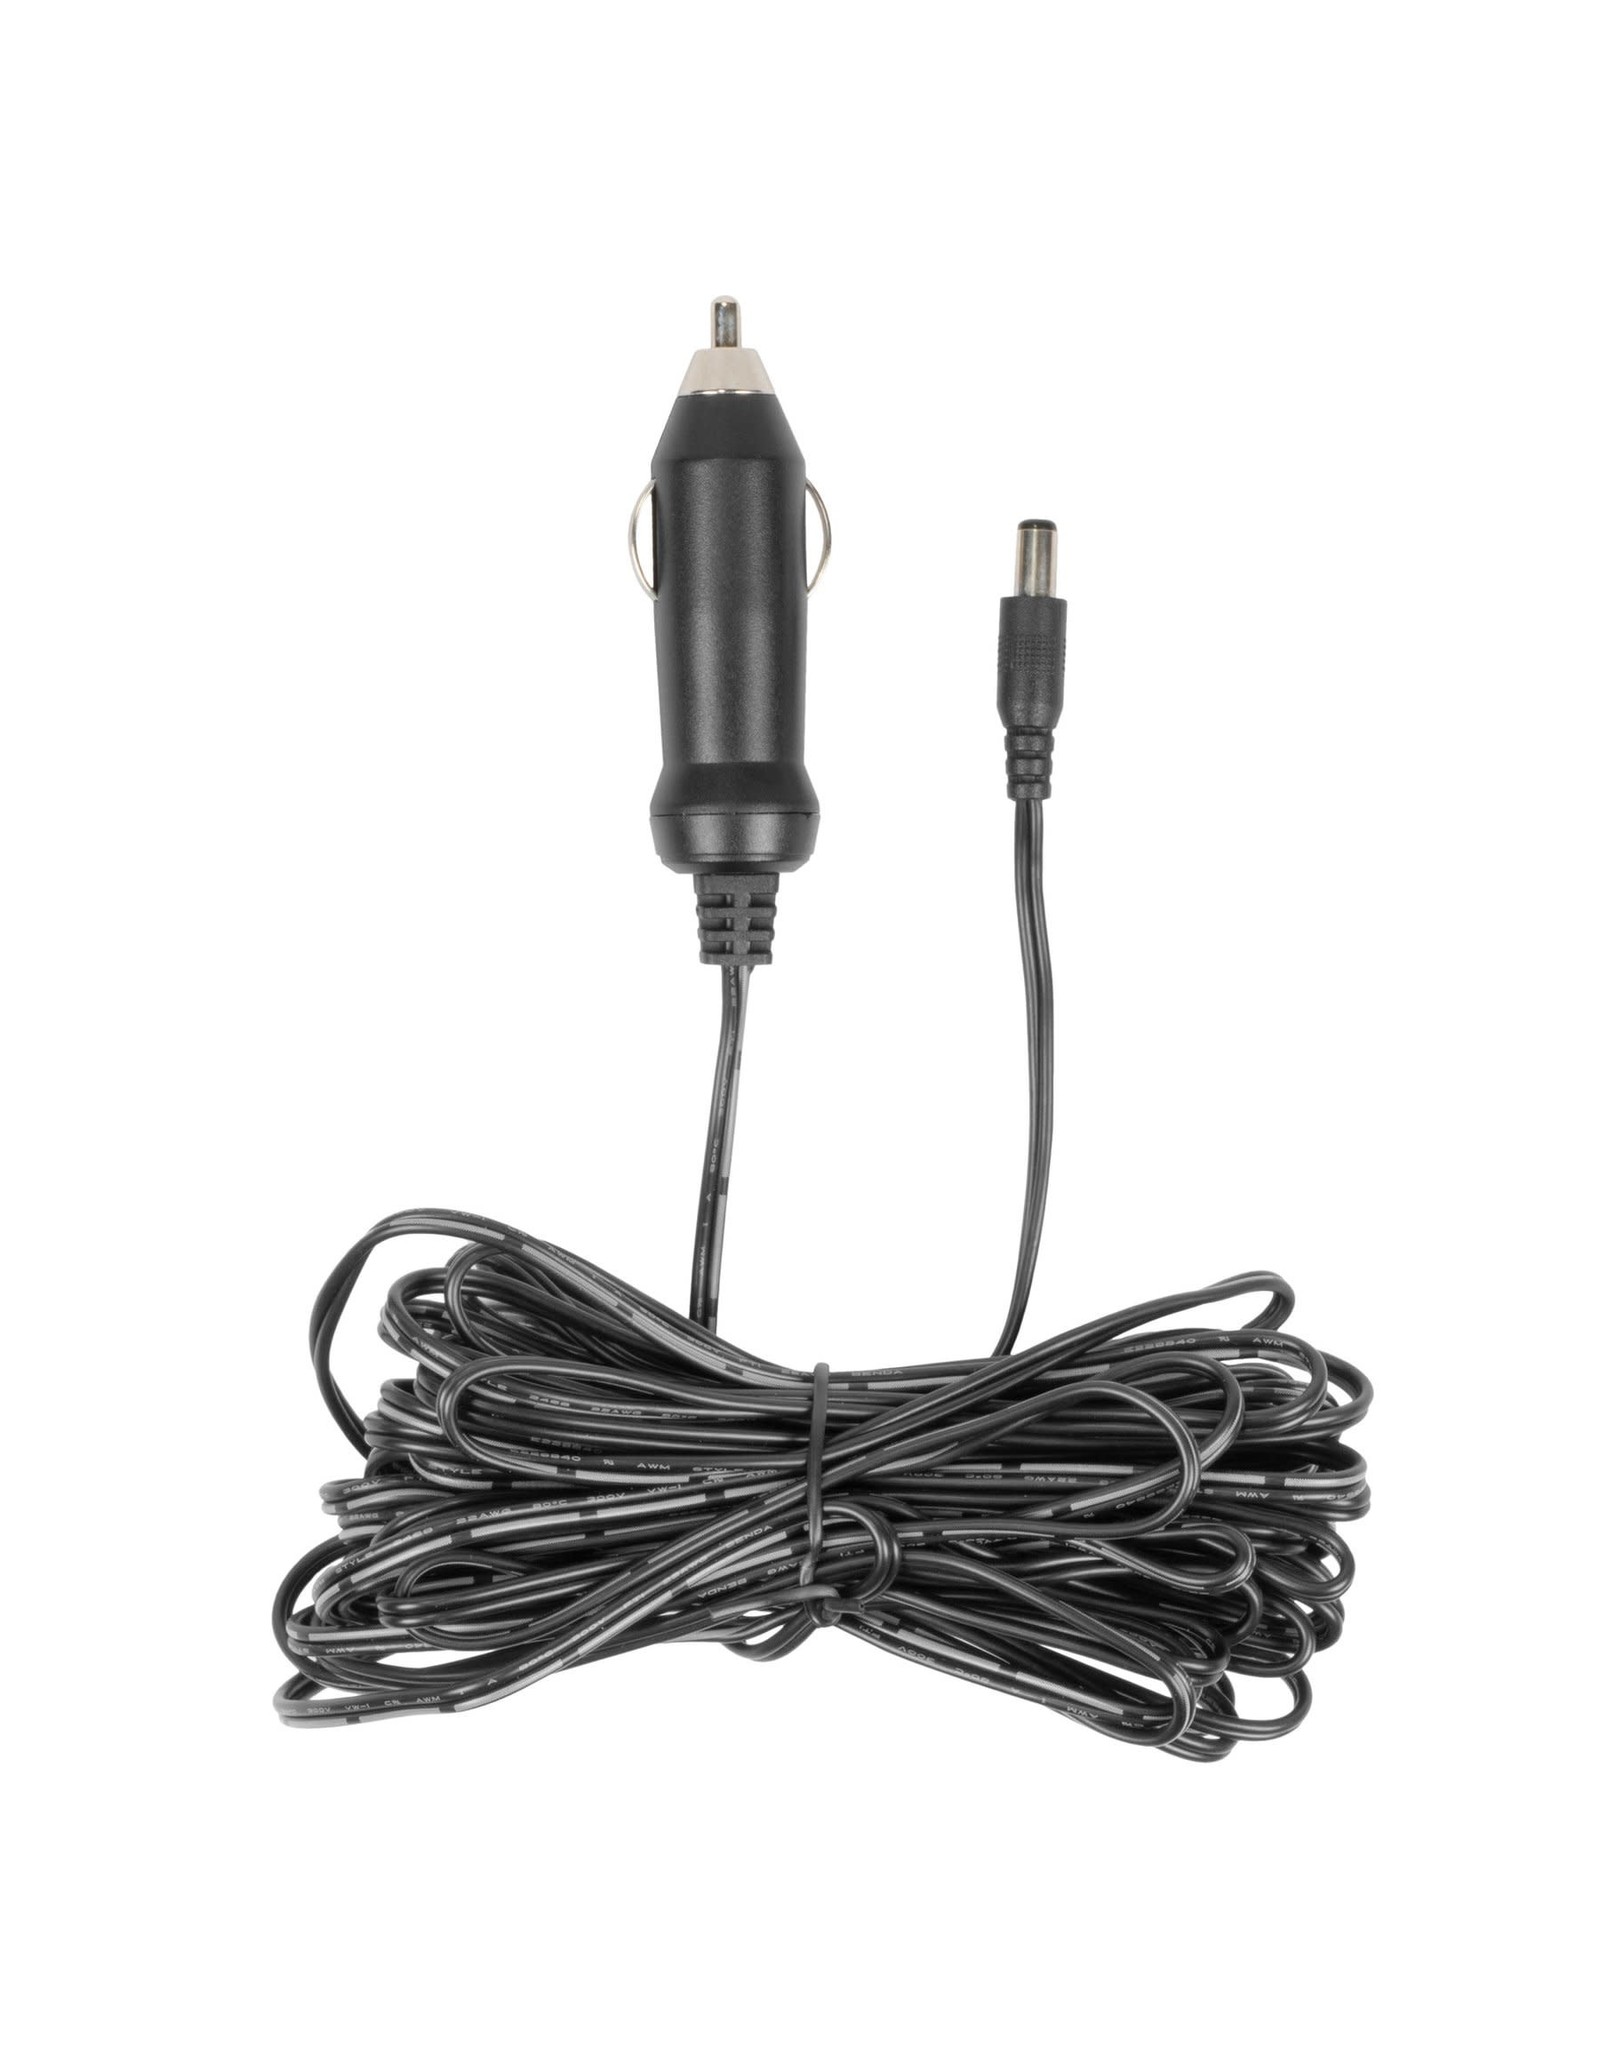 Explore Scientific Explore Scientific EXOS-2GT DC Car 12V/7.5m Adapter Cable